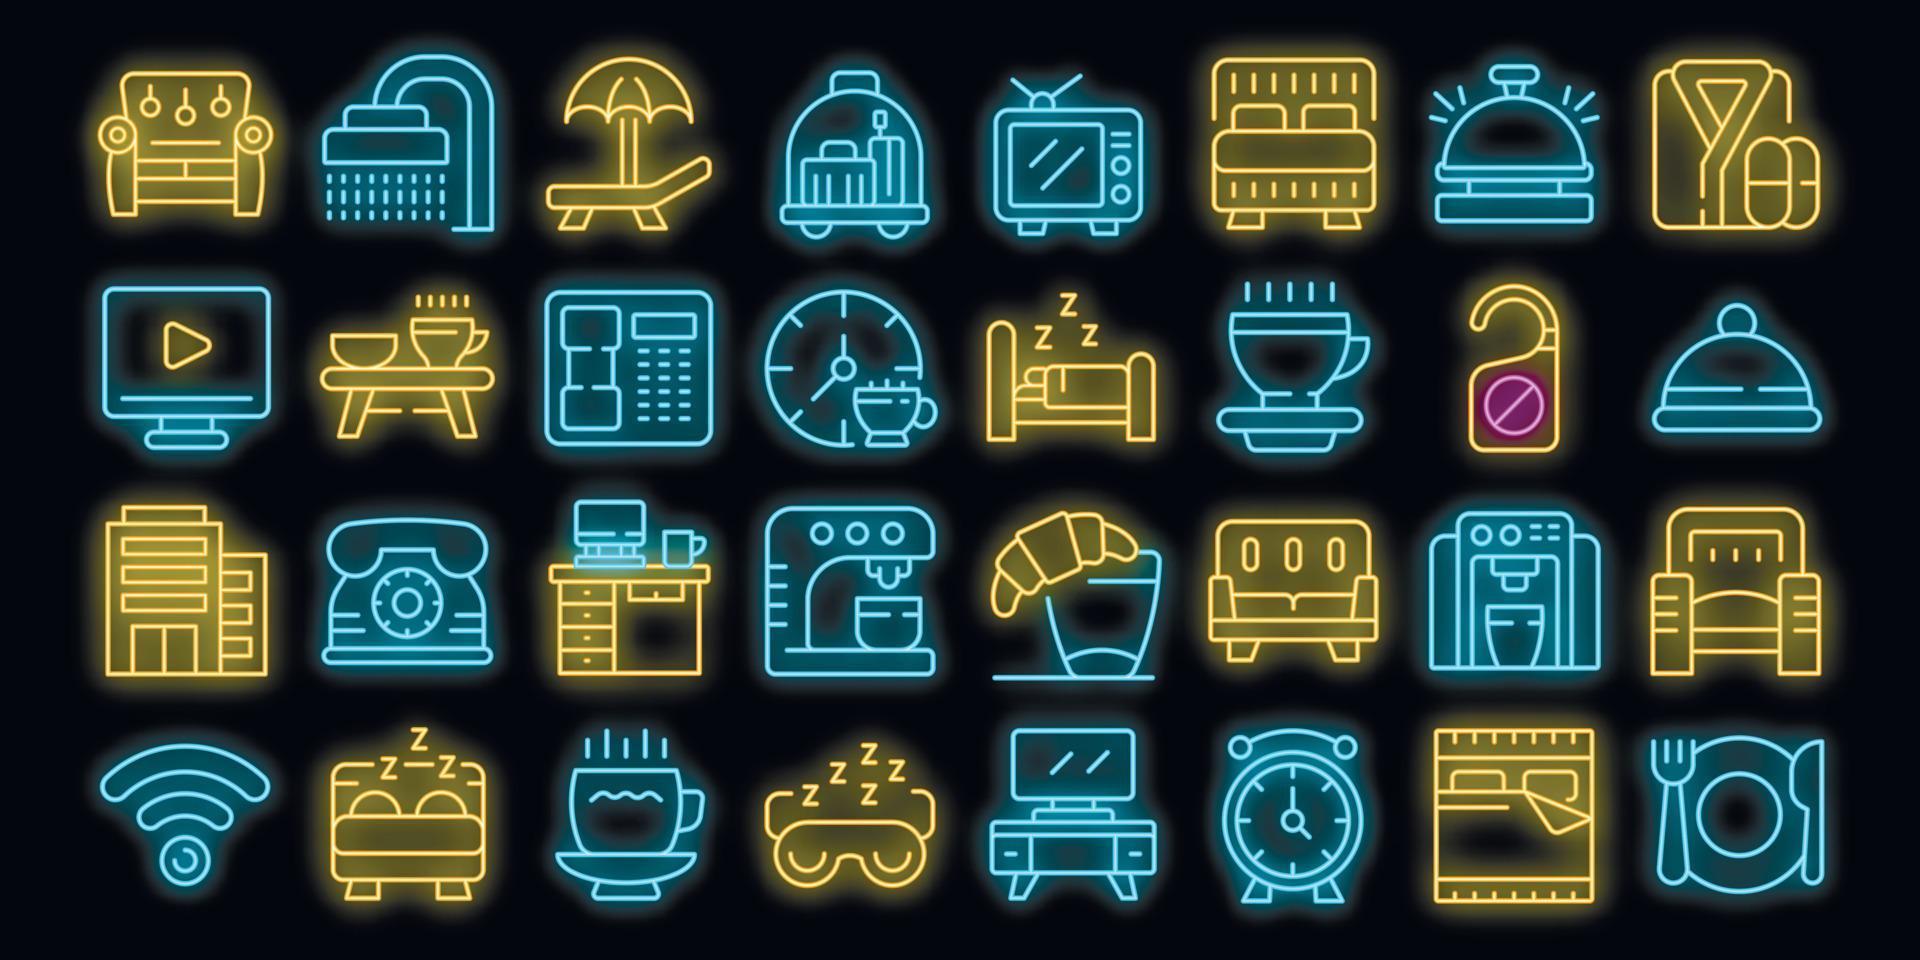 Coffee in bed icons set vector neon